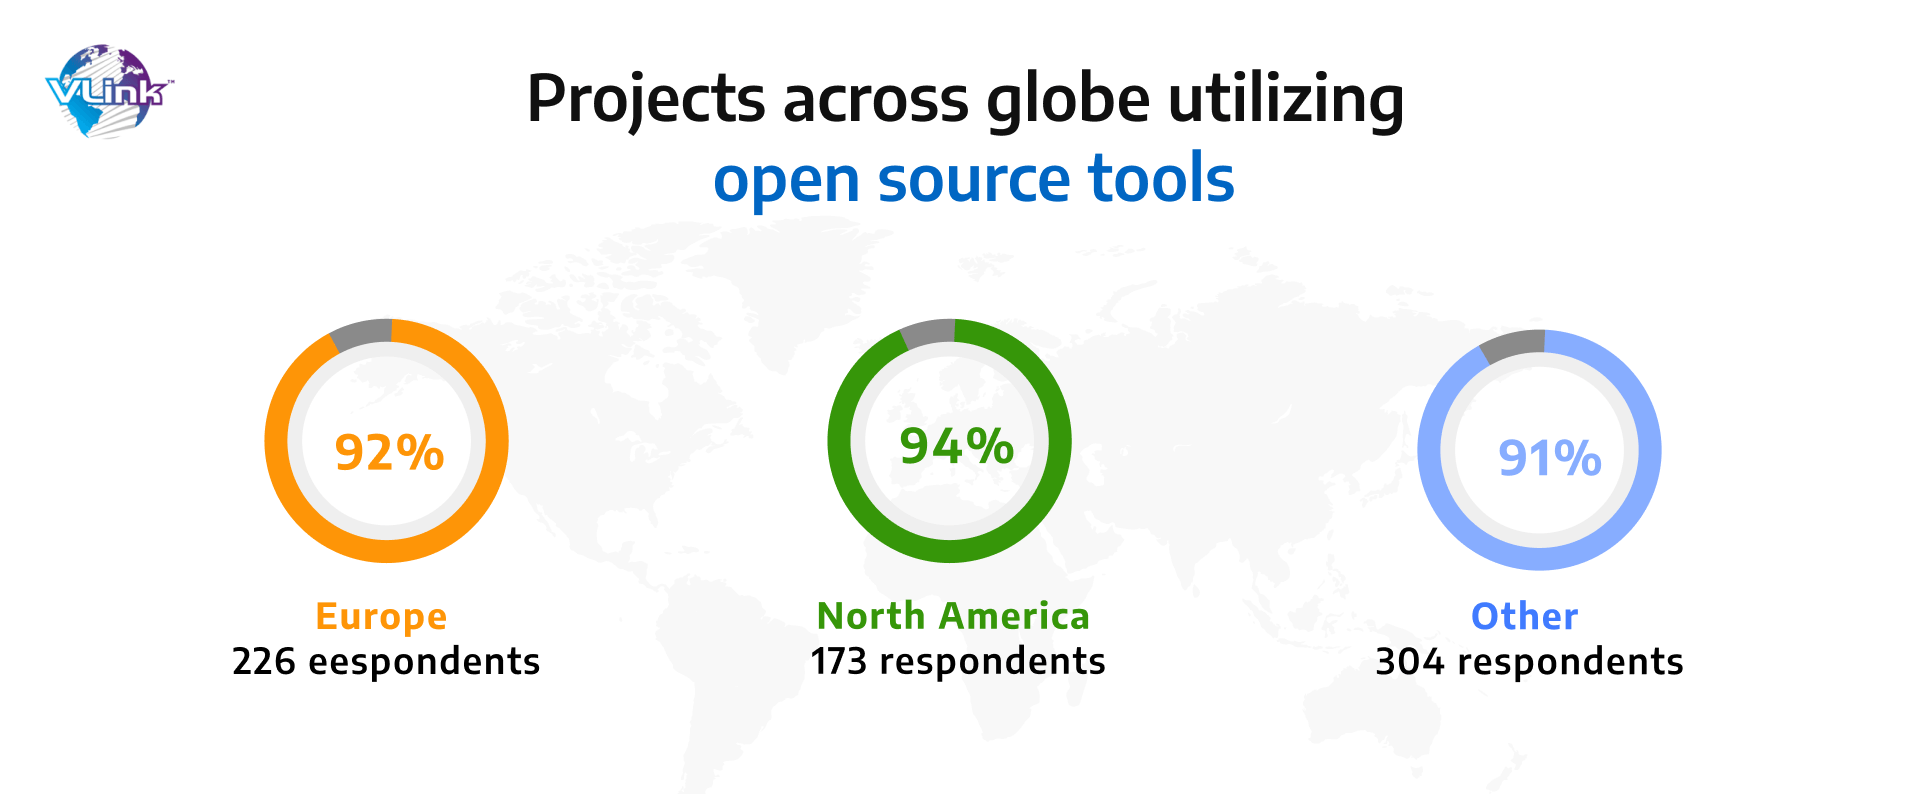 Projects across globe utilizing open source tools